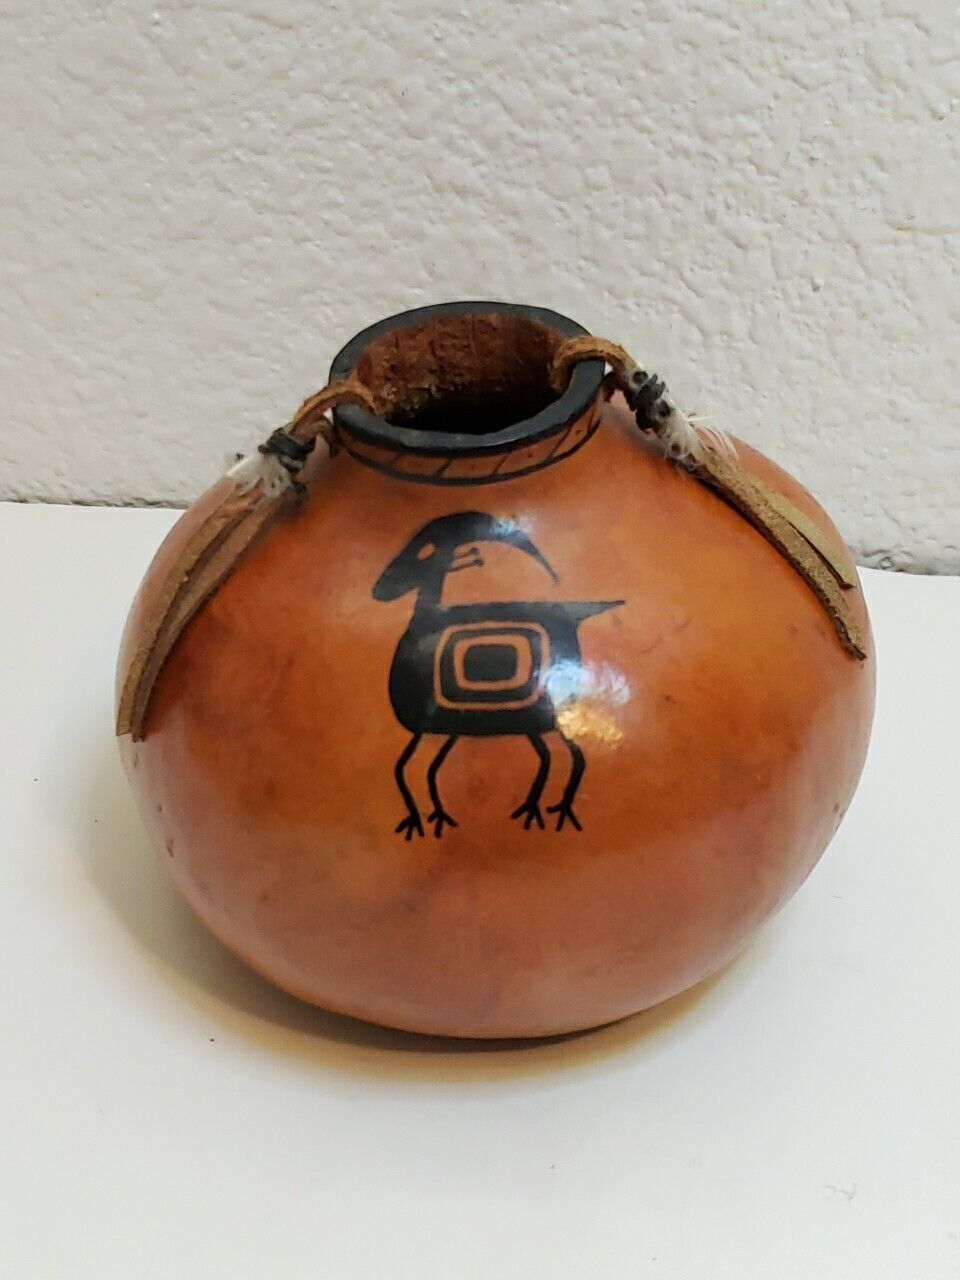 Hand-crafted Gourd Native American Folk Art Signed by  b. grant 5” X 4”